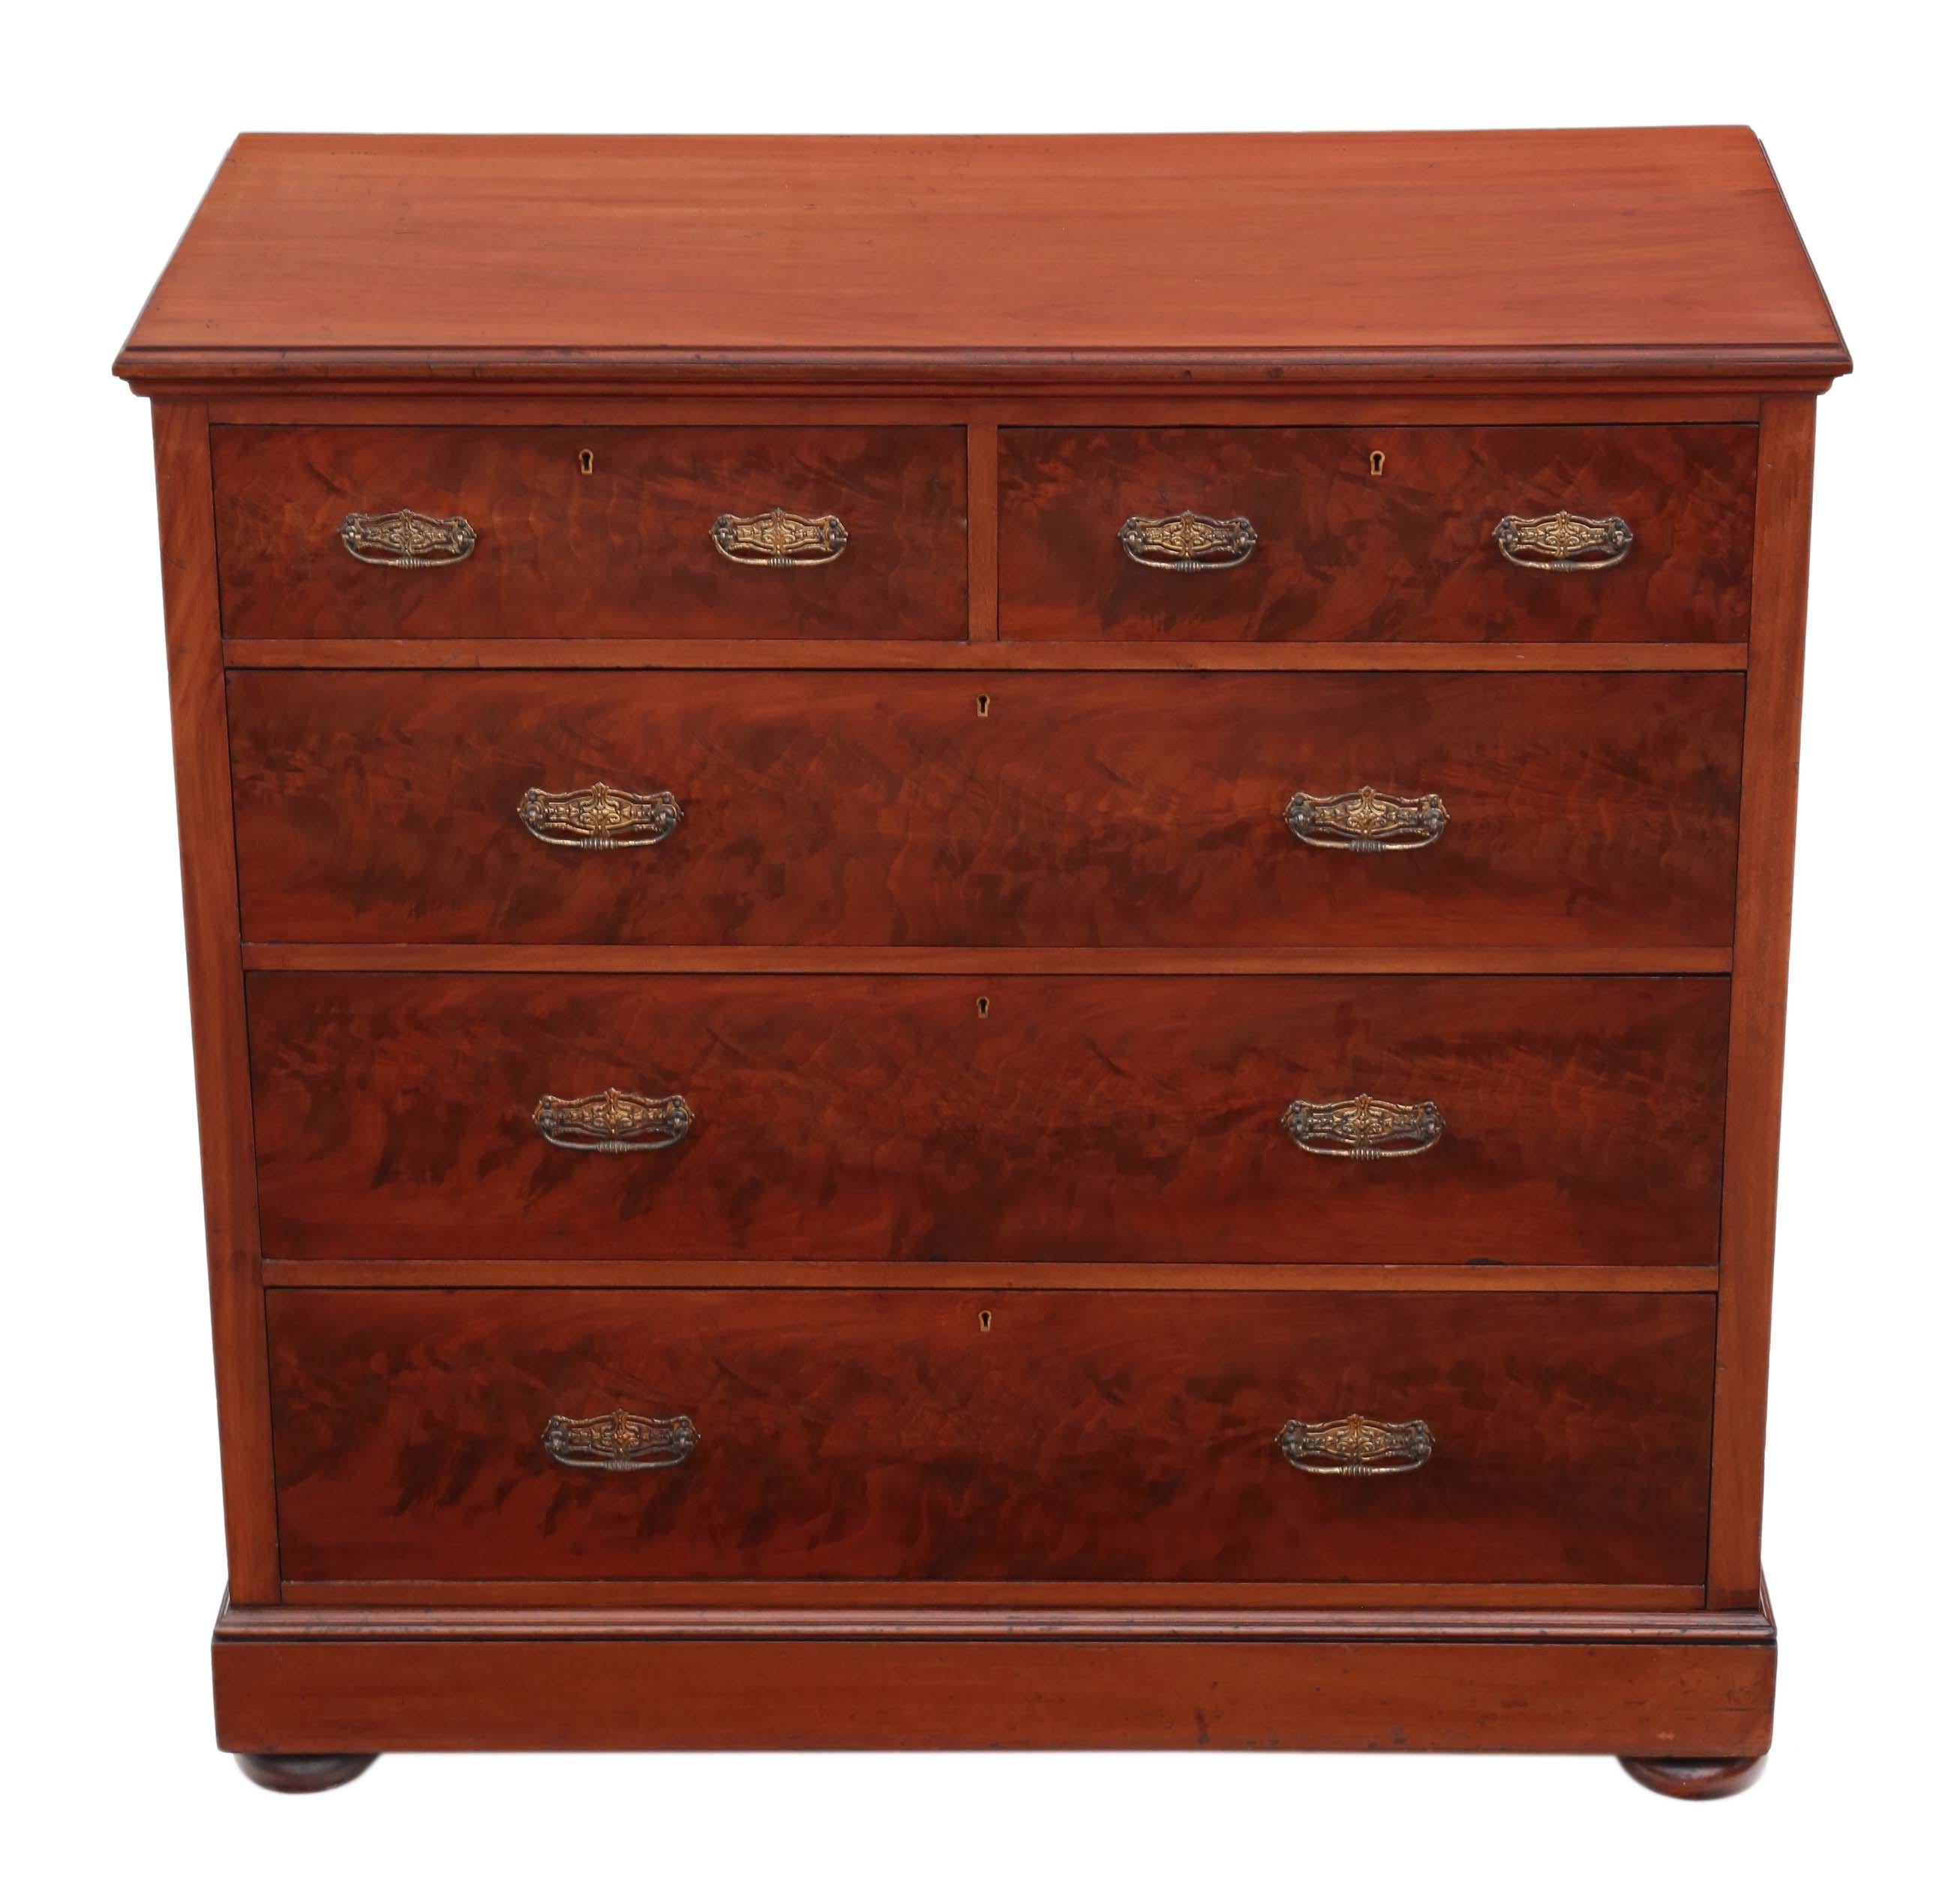 Antique fine quality large Victorian circa 1900 flame mahogany chest of drawers.

No loose joints and the ash lined drawers slide freely. A nice quality piece, with clean, simple styling.

No woodworm.

Overall maximum dimensions: 115cm W x